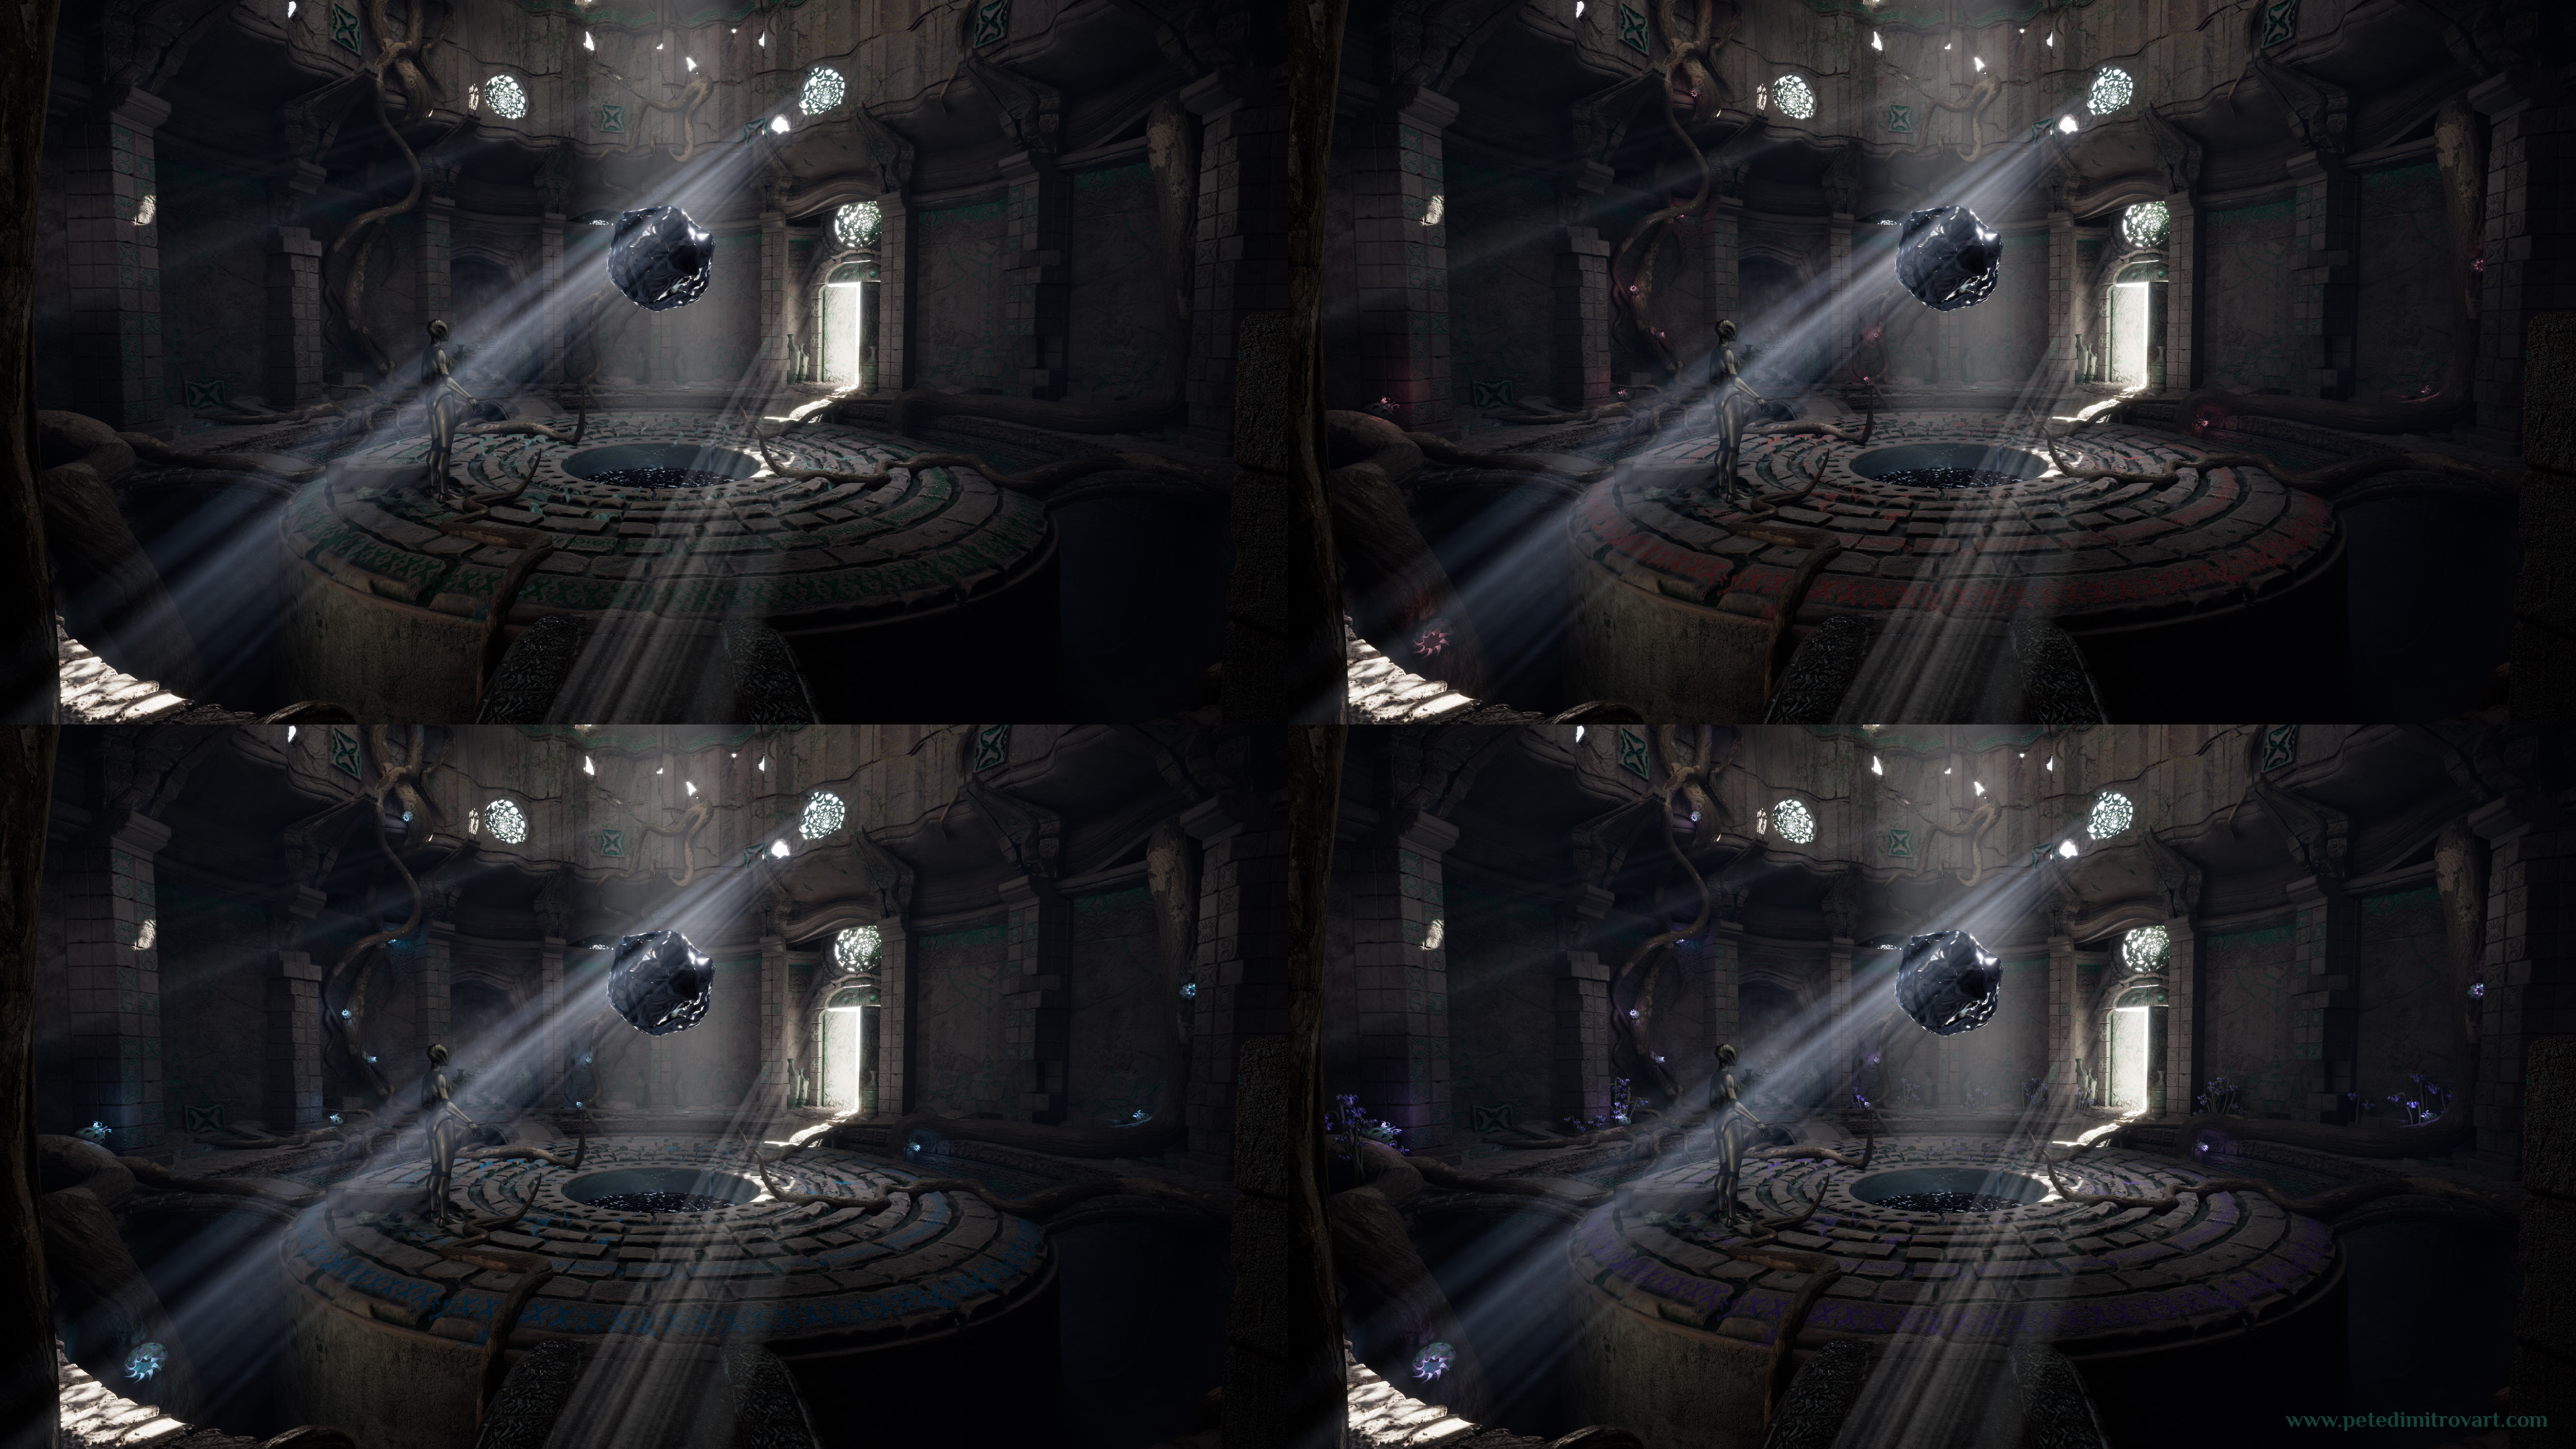 The previous, main camera screenshot showcased again. Here there are four versions put next to one another. First one shows the room with green inscriptions and decals. Second has those elements painted red but also has little, glowing flowers. Third is all of that but shaded blue. Fourth is all of it tinted in purple instead. Screenshots from UE5.